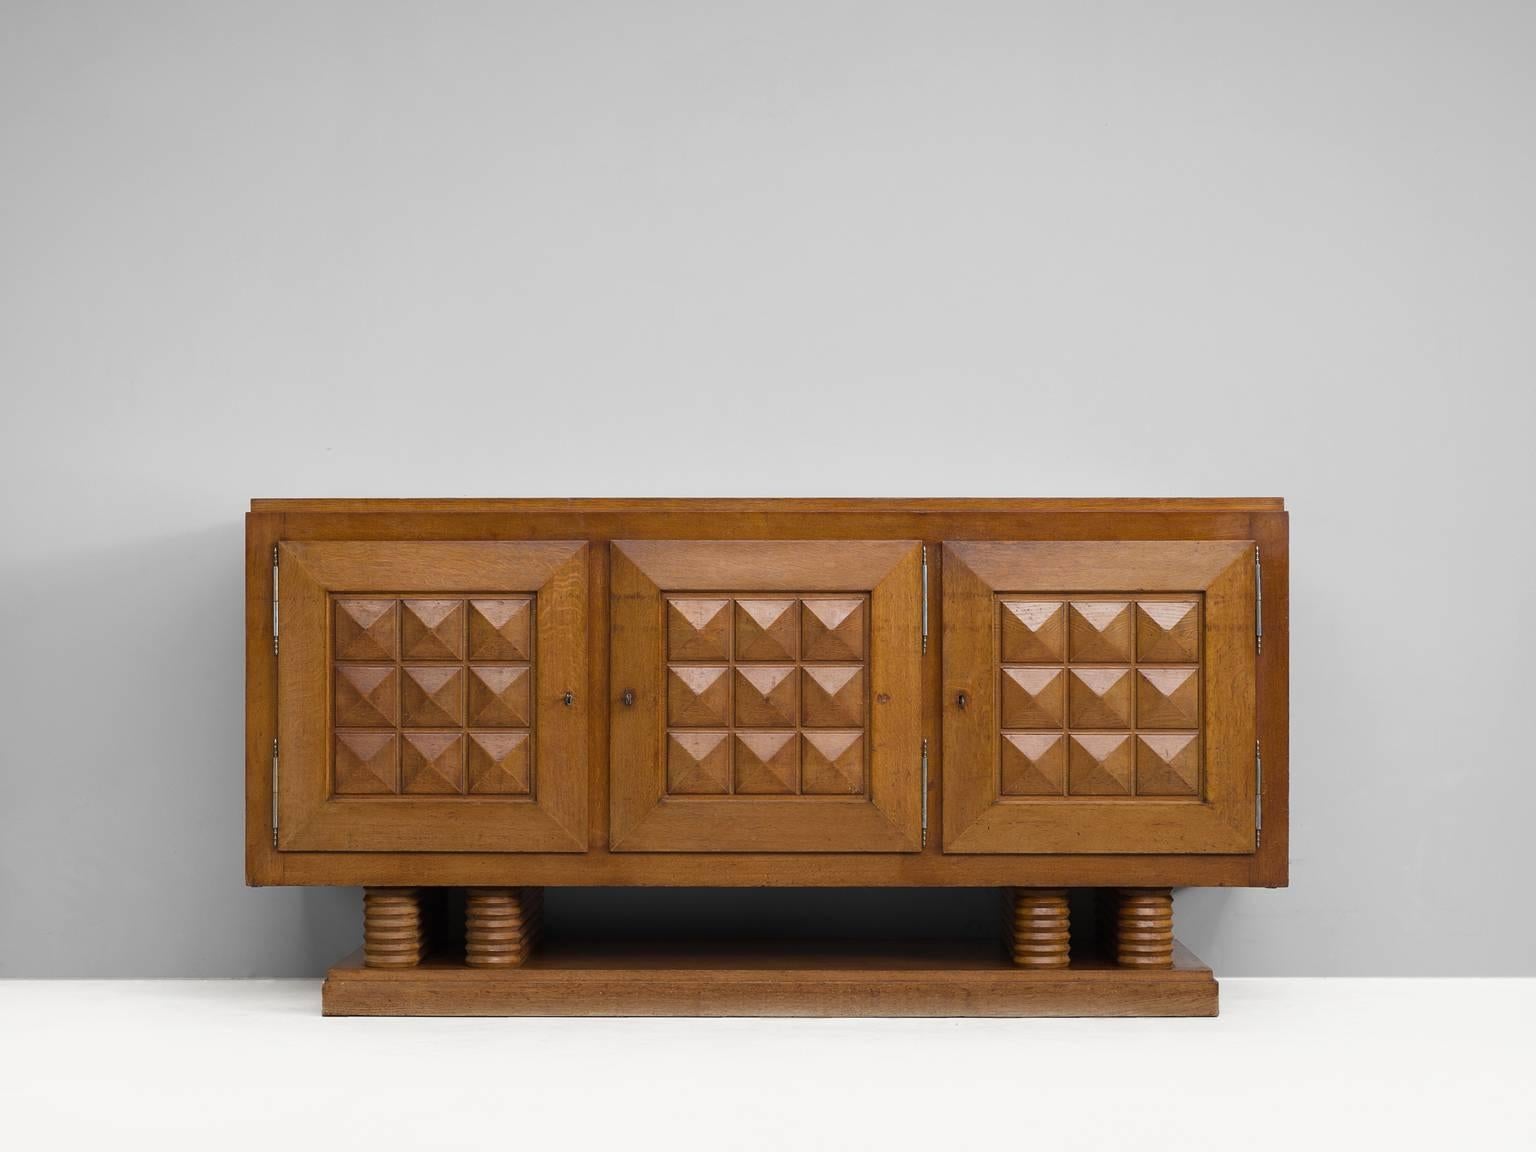 Sturdy Art Deco credenza in oak by Gaston Poisson, France, 1930s.

This three-door sideboard has well made graphical door panels and parquet top. The warm expression of the oakwood is wonderful, and shows a nice patina.

The piece is equipped